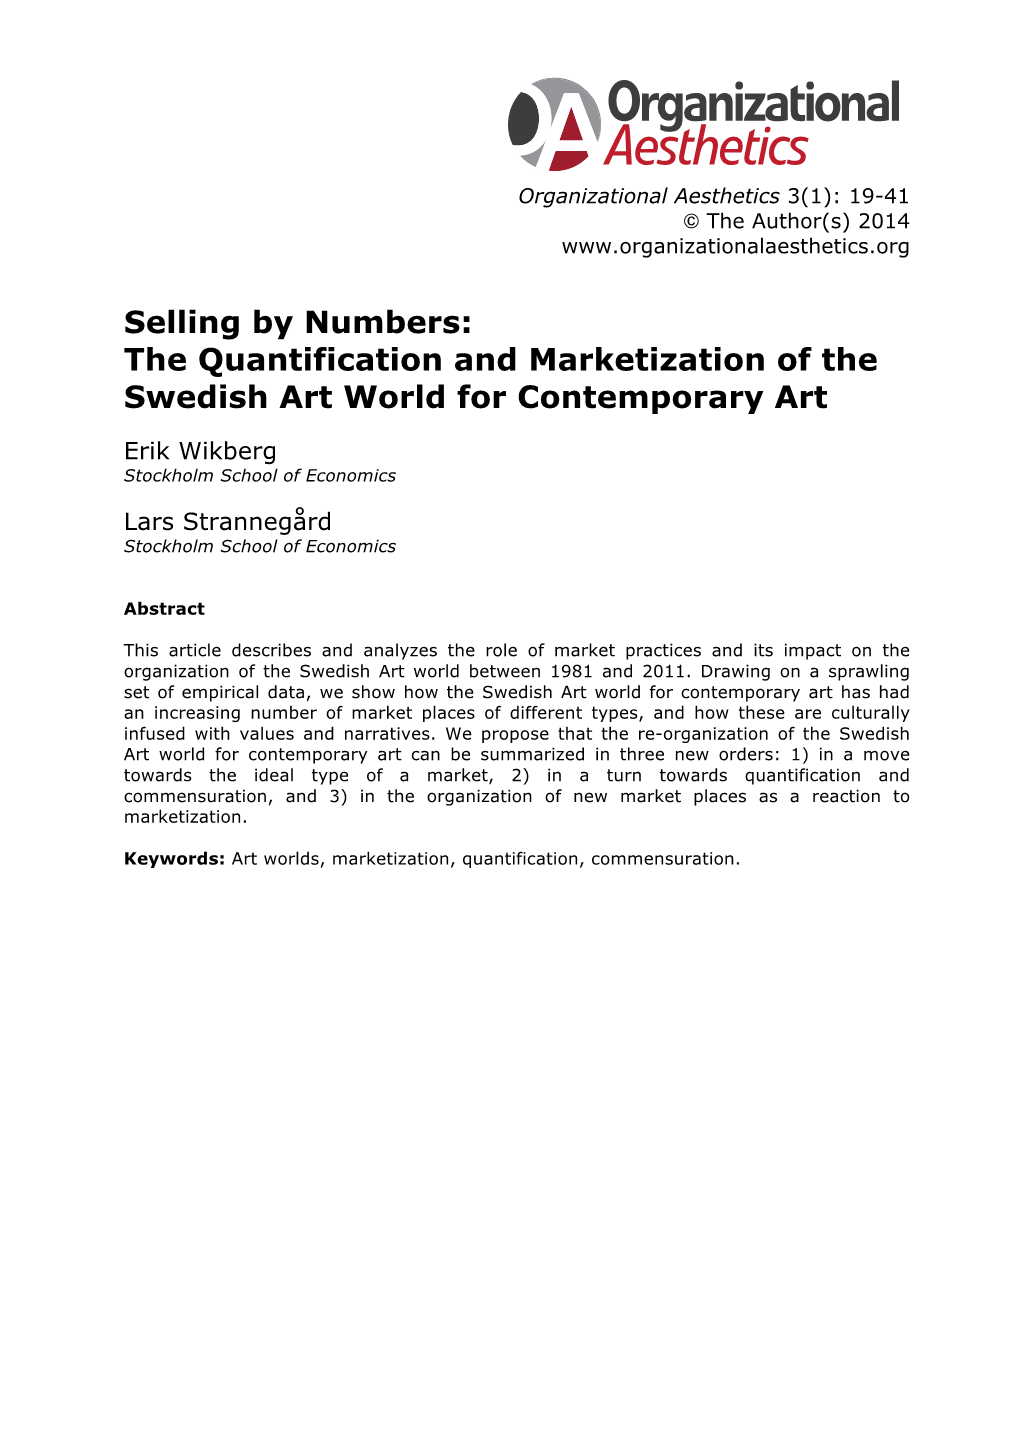 The Quantification and Marketization of the Swedish Art World for Contemporary Art